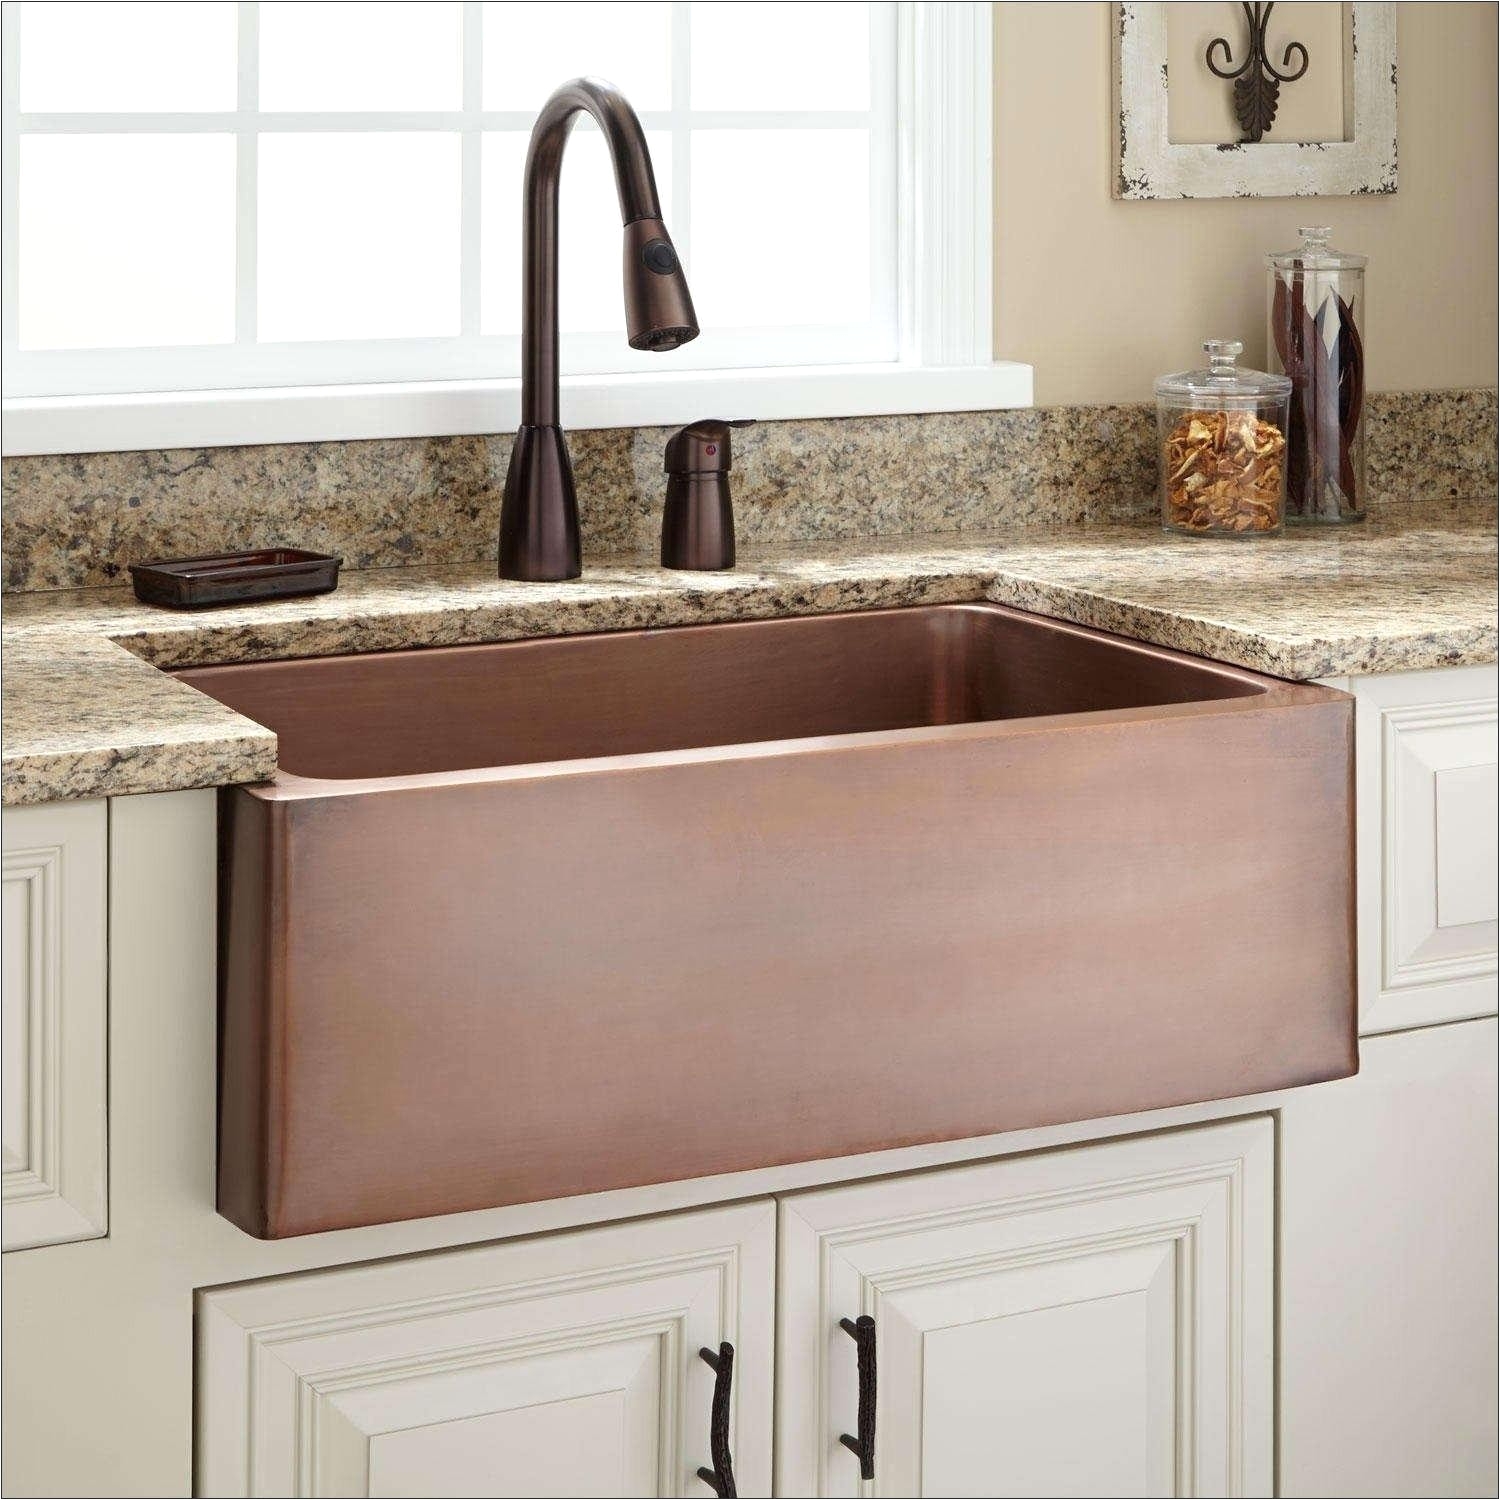 shenandoah kitchen cabinets best of furniture awesome butcher block countertops lowes best kitchen